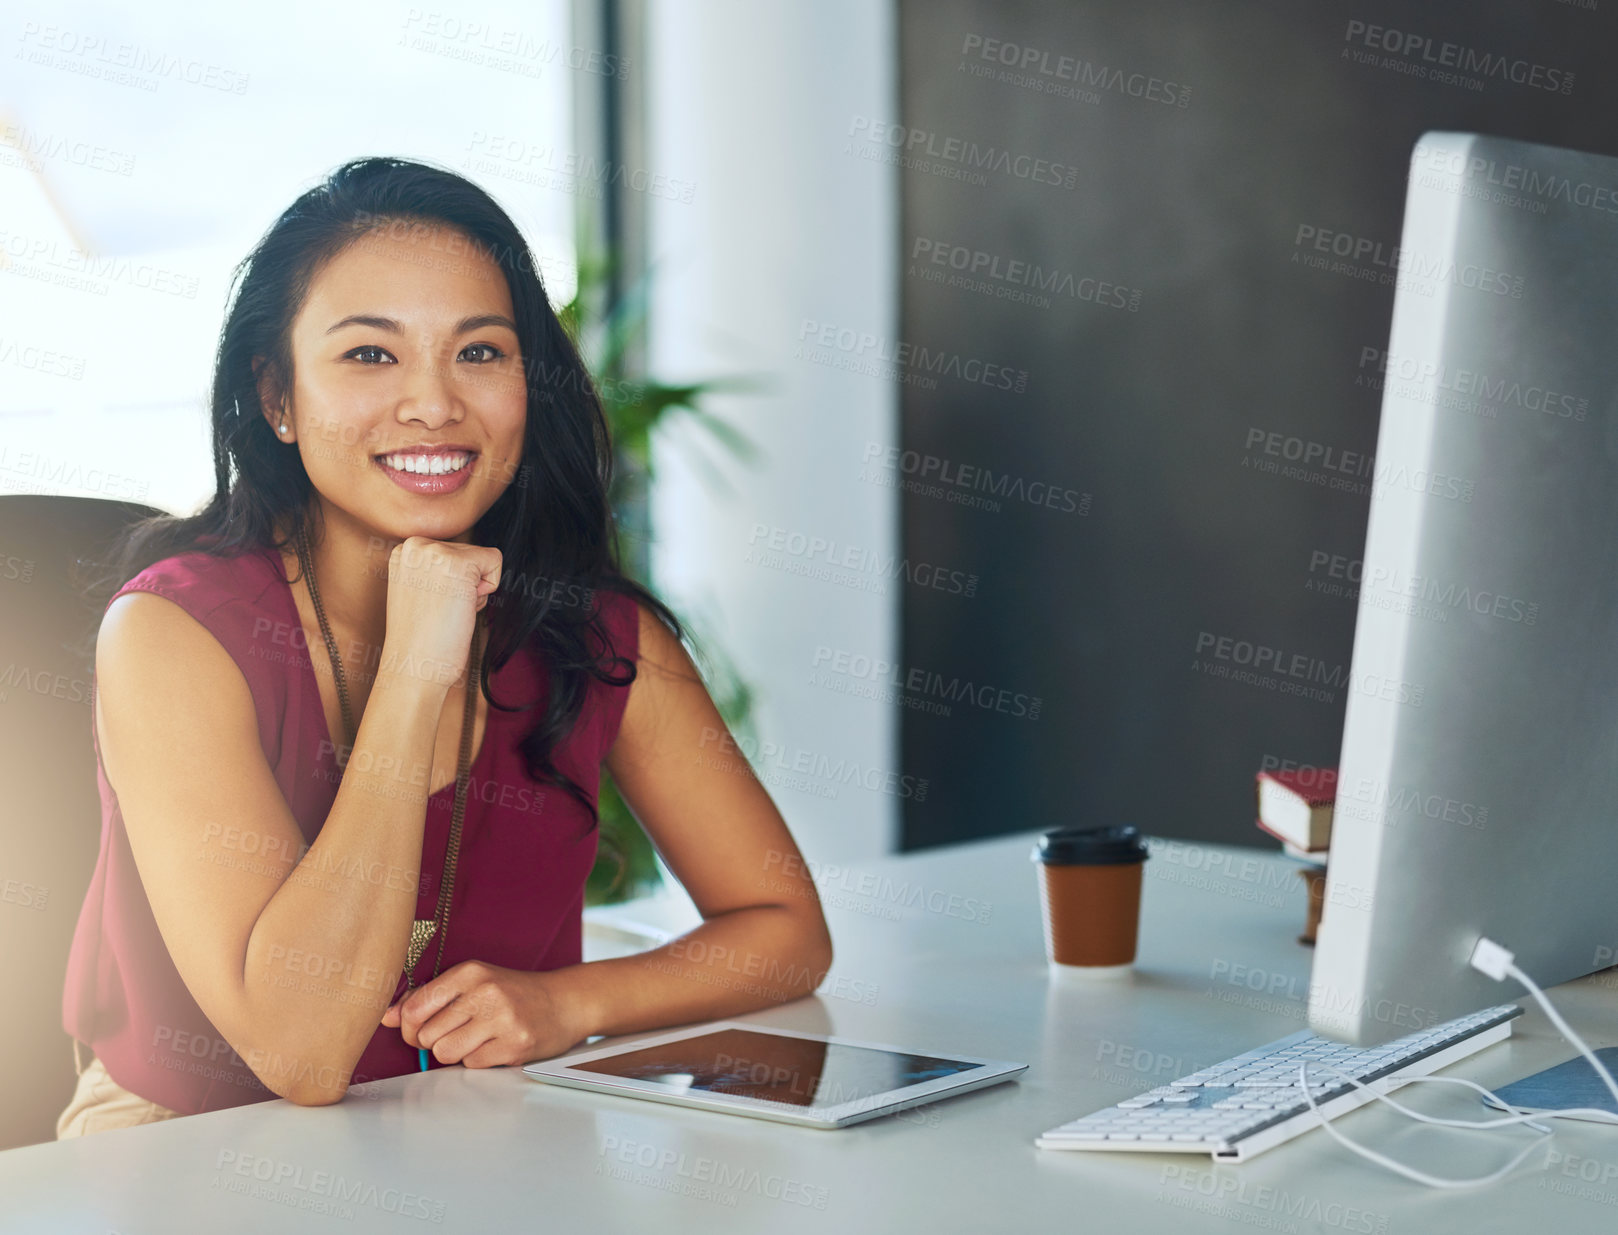 Buy stock photo Portrait of a confident young businesswoman sitting at a desk in a modern office